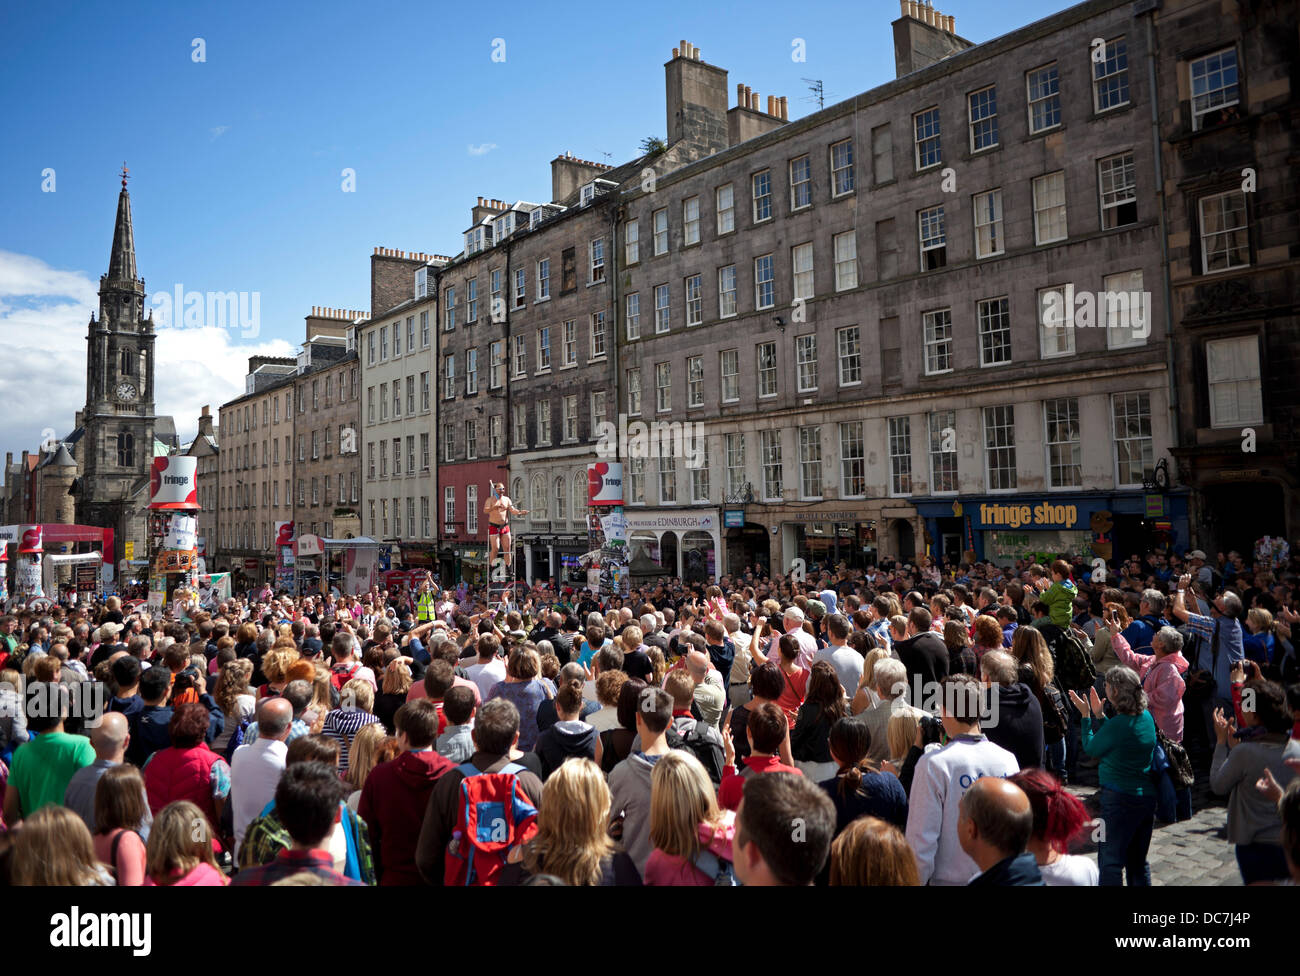 Edinburgh, UK. 11th Aug, 2013. Large audiences gather in the sunshine on Edinburgh's Royal Mile to be entertained by the highly skilful Street Performers during the Edinburgh Festival Fringe. Stock Photo